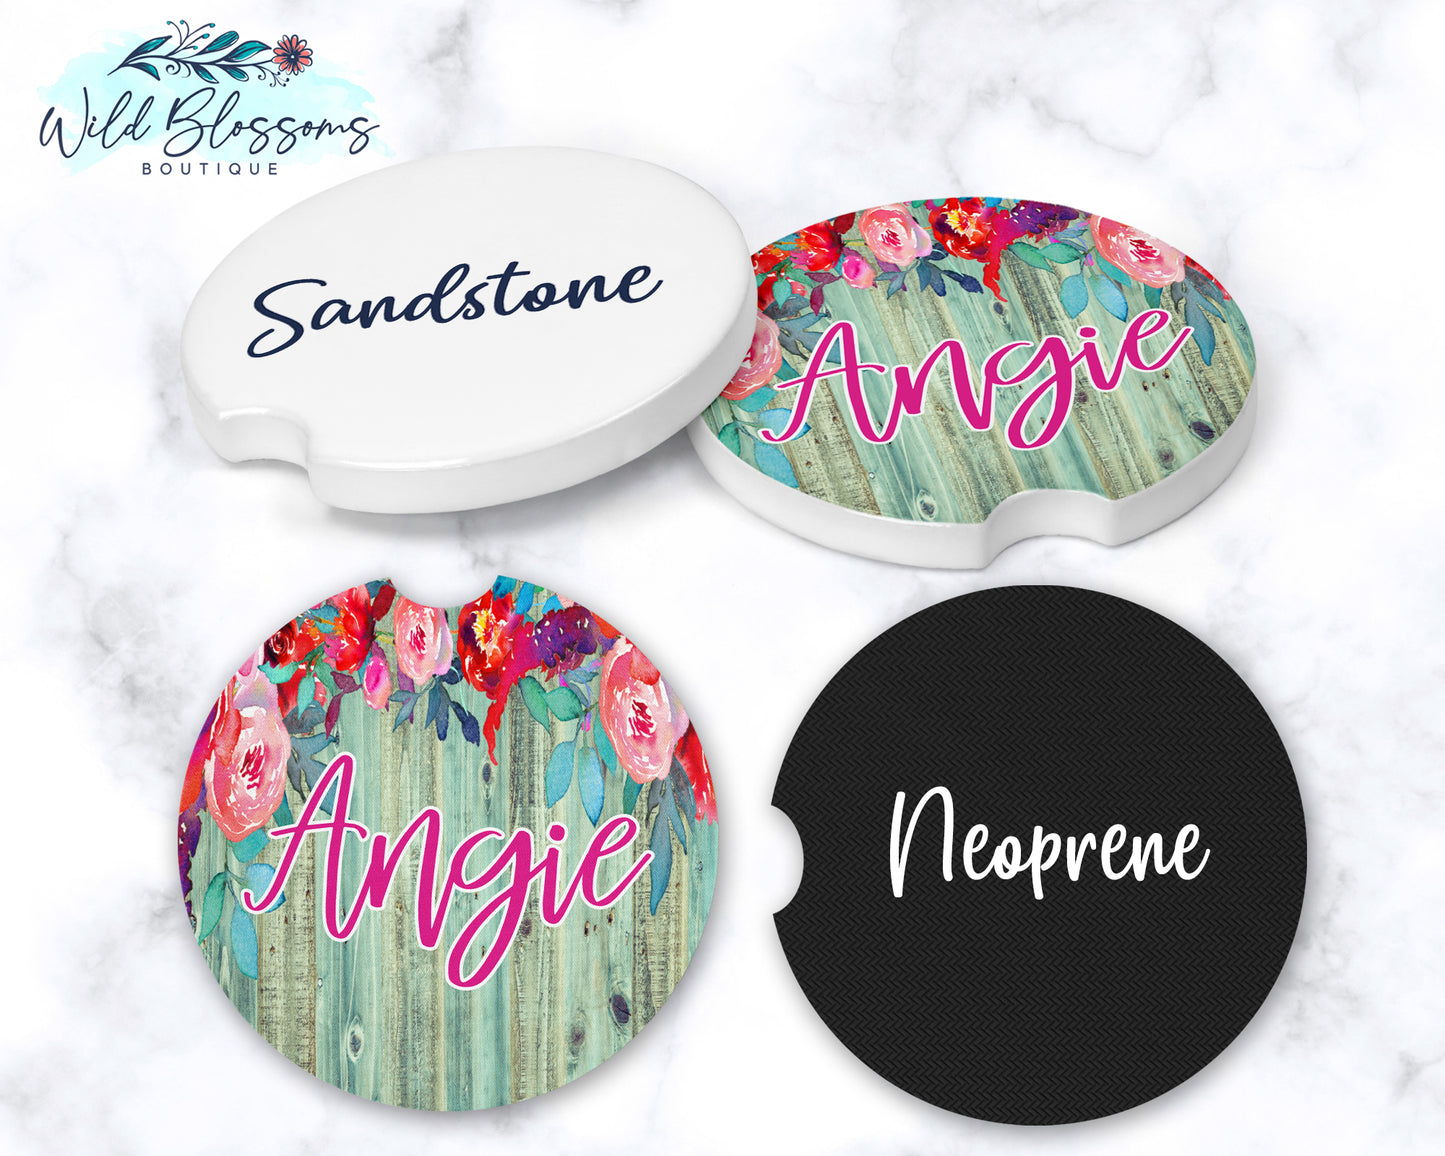 Wooden Turquoise Floral Car Coasters